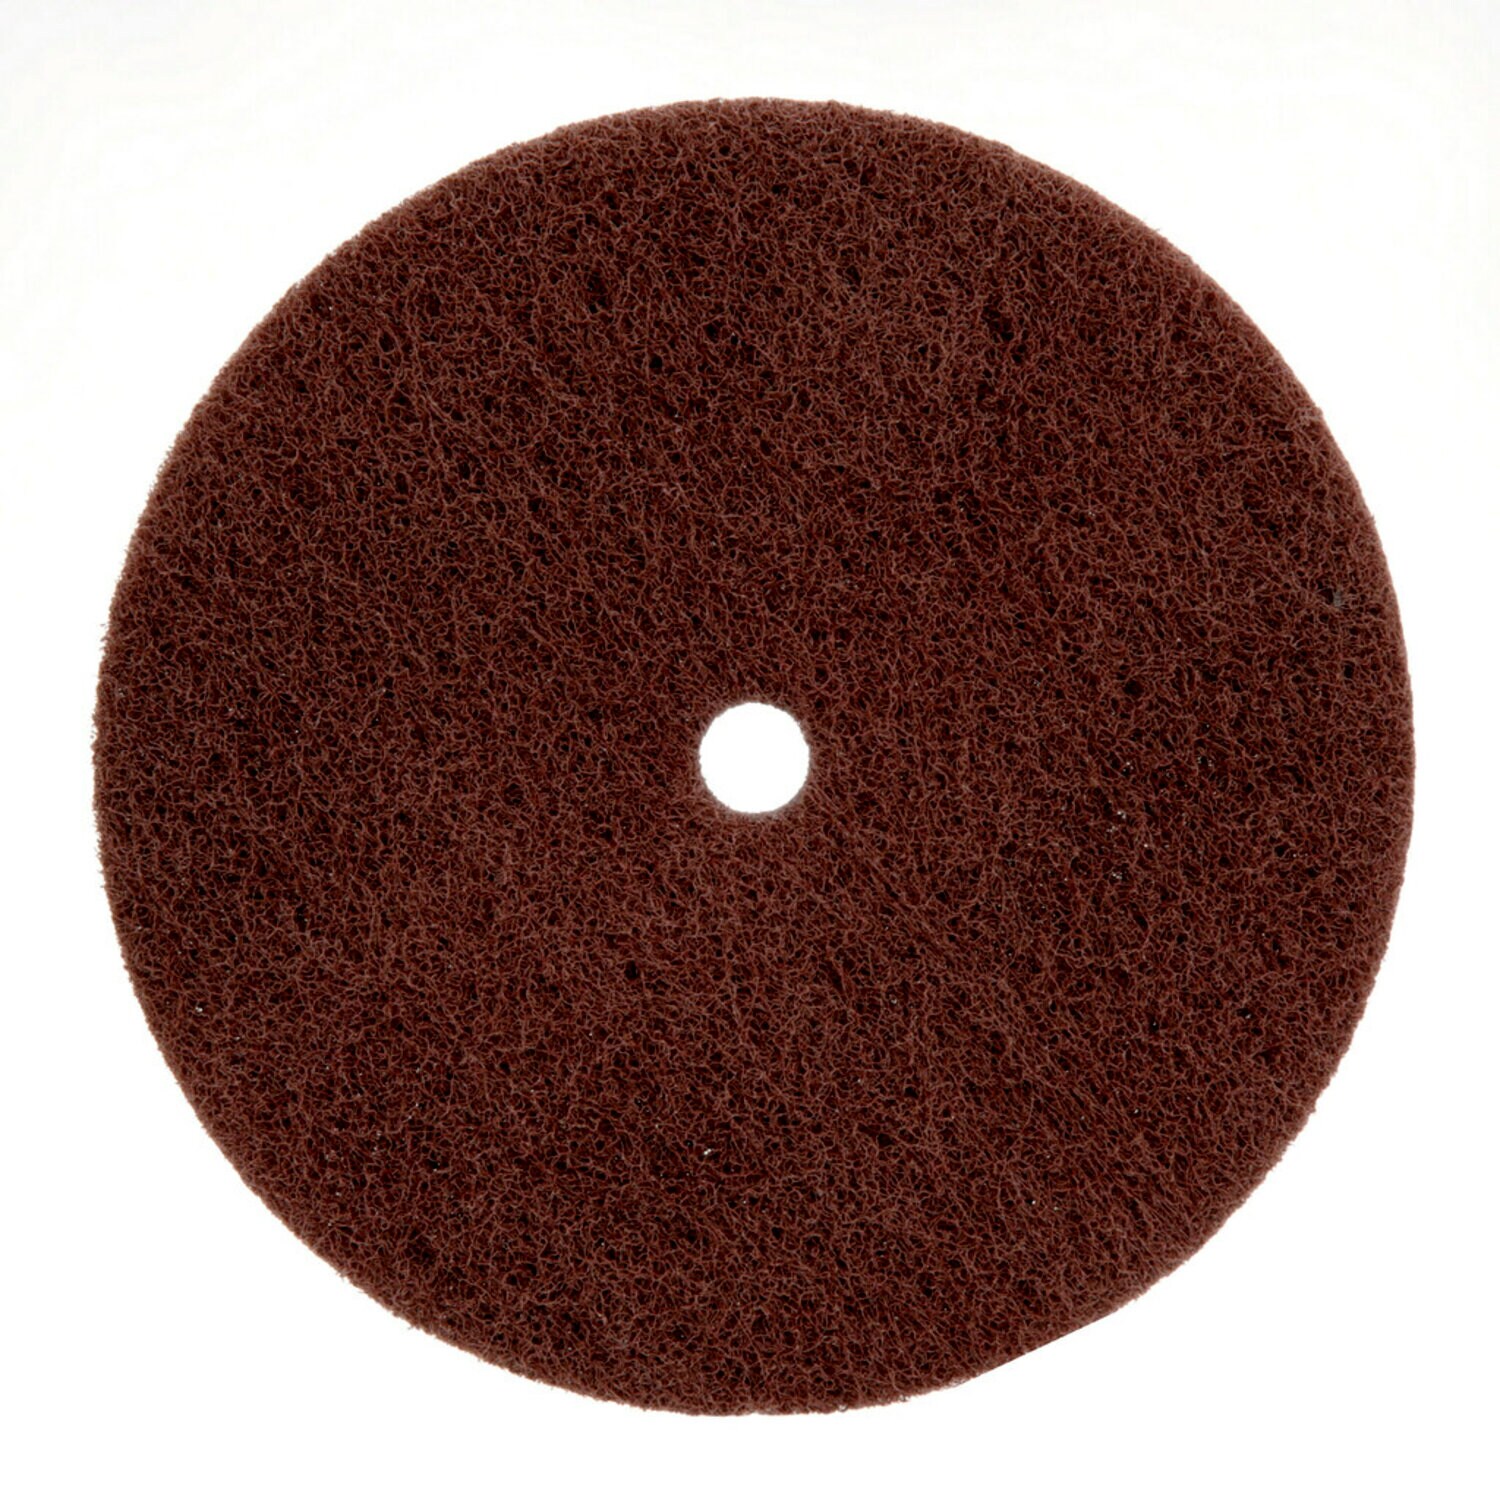 7000121861 - Standard Abrasives Buff and Blend GP Disc, 840708, 6 in x 1/2 in A VFN,
10/Pac, 100 ea/Case